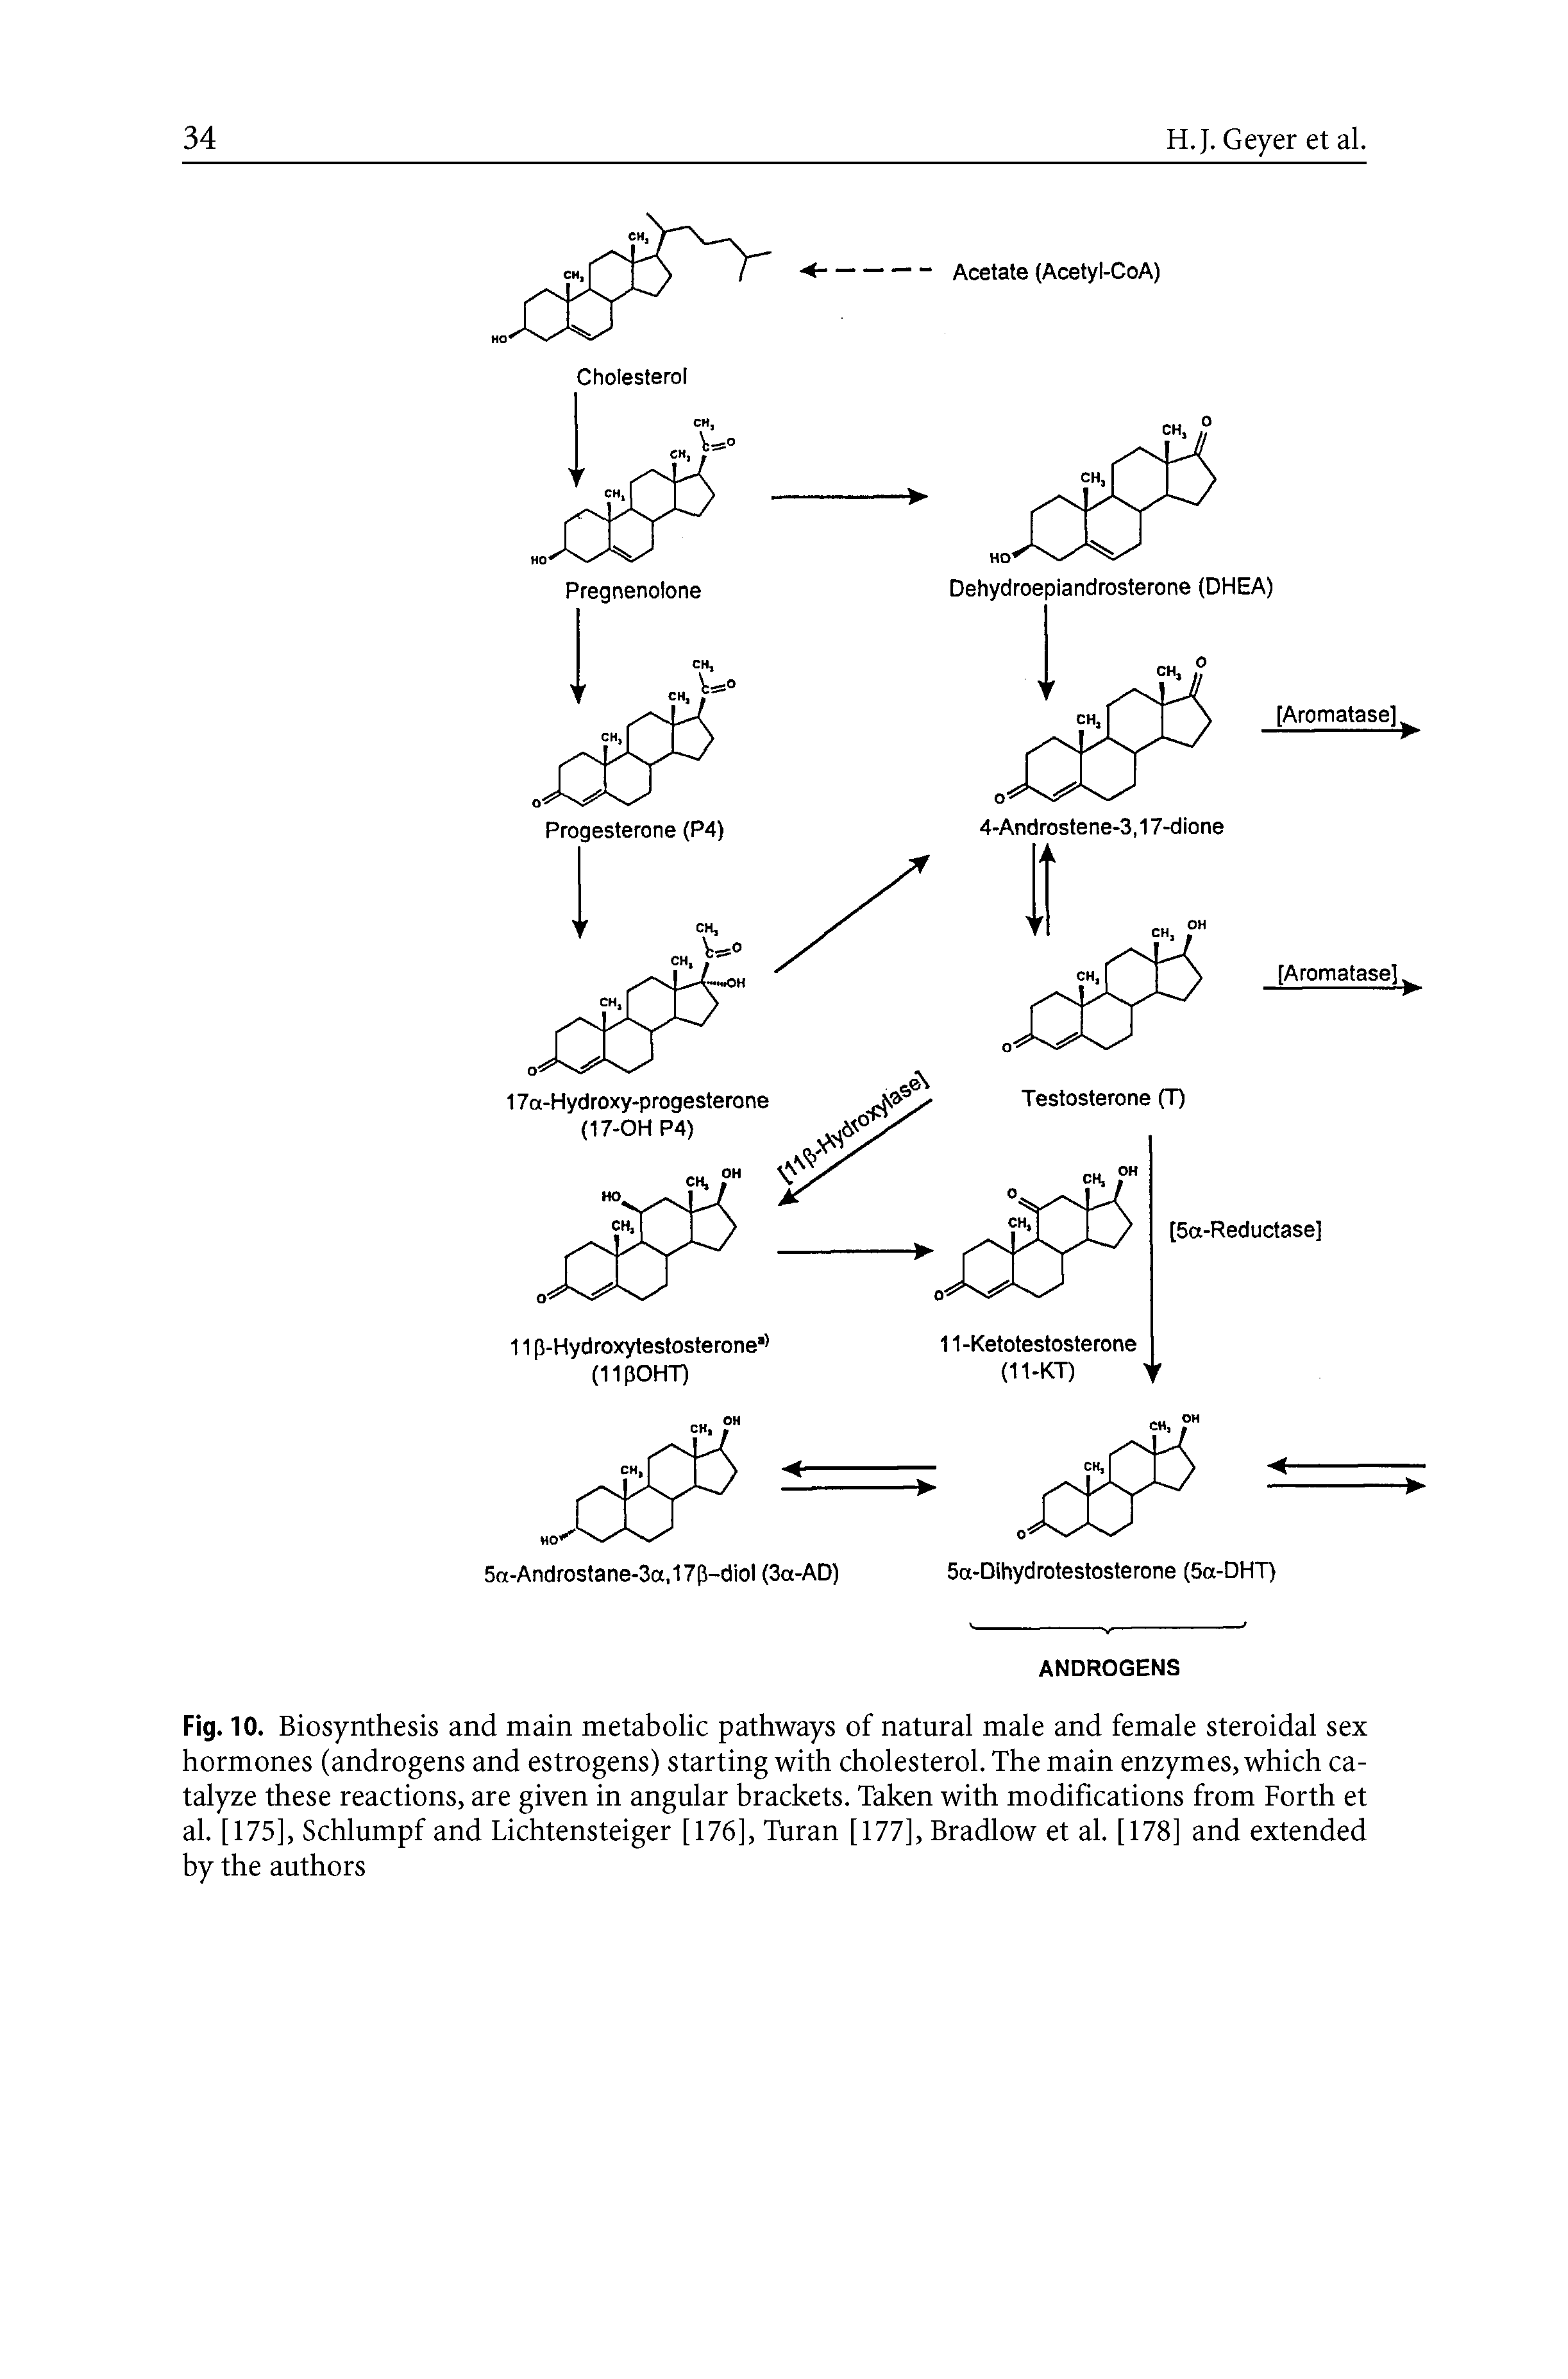 Fig. 10. Biosynthesis and main metabolic pathways of natural male and female steroidal sex hormones (androgens and estrogens) starting with cholesterol. The main enzymes, which catalyze these reactions, are given in angular brackets. Taken with modifications from Forth et al. [175], Schlumpf and Lichtensteiger [176], Turan [177], Bradlow et al. [178] and extended by the authors...